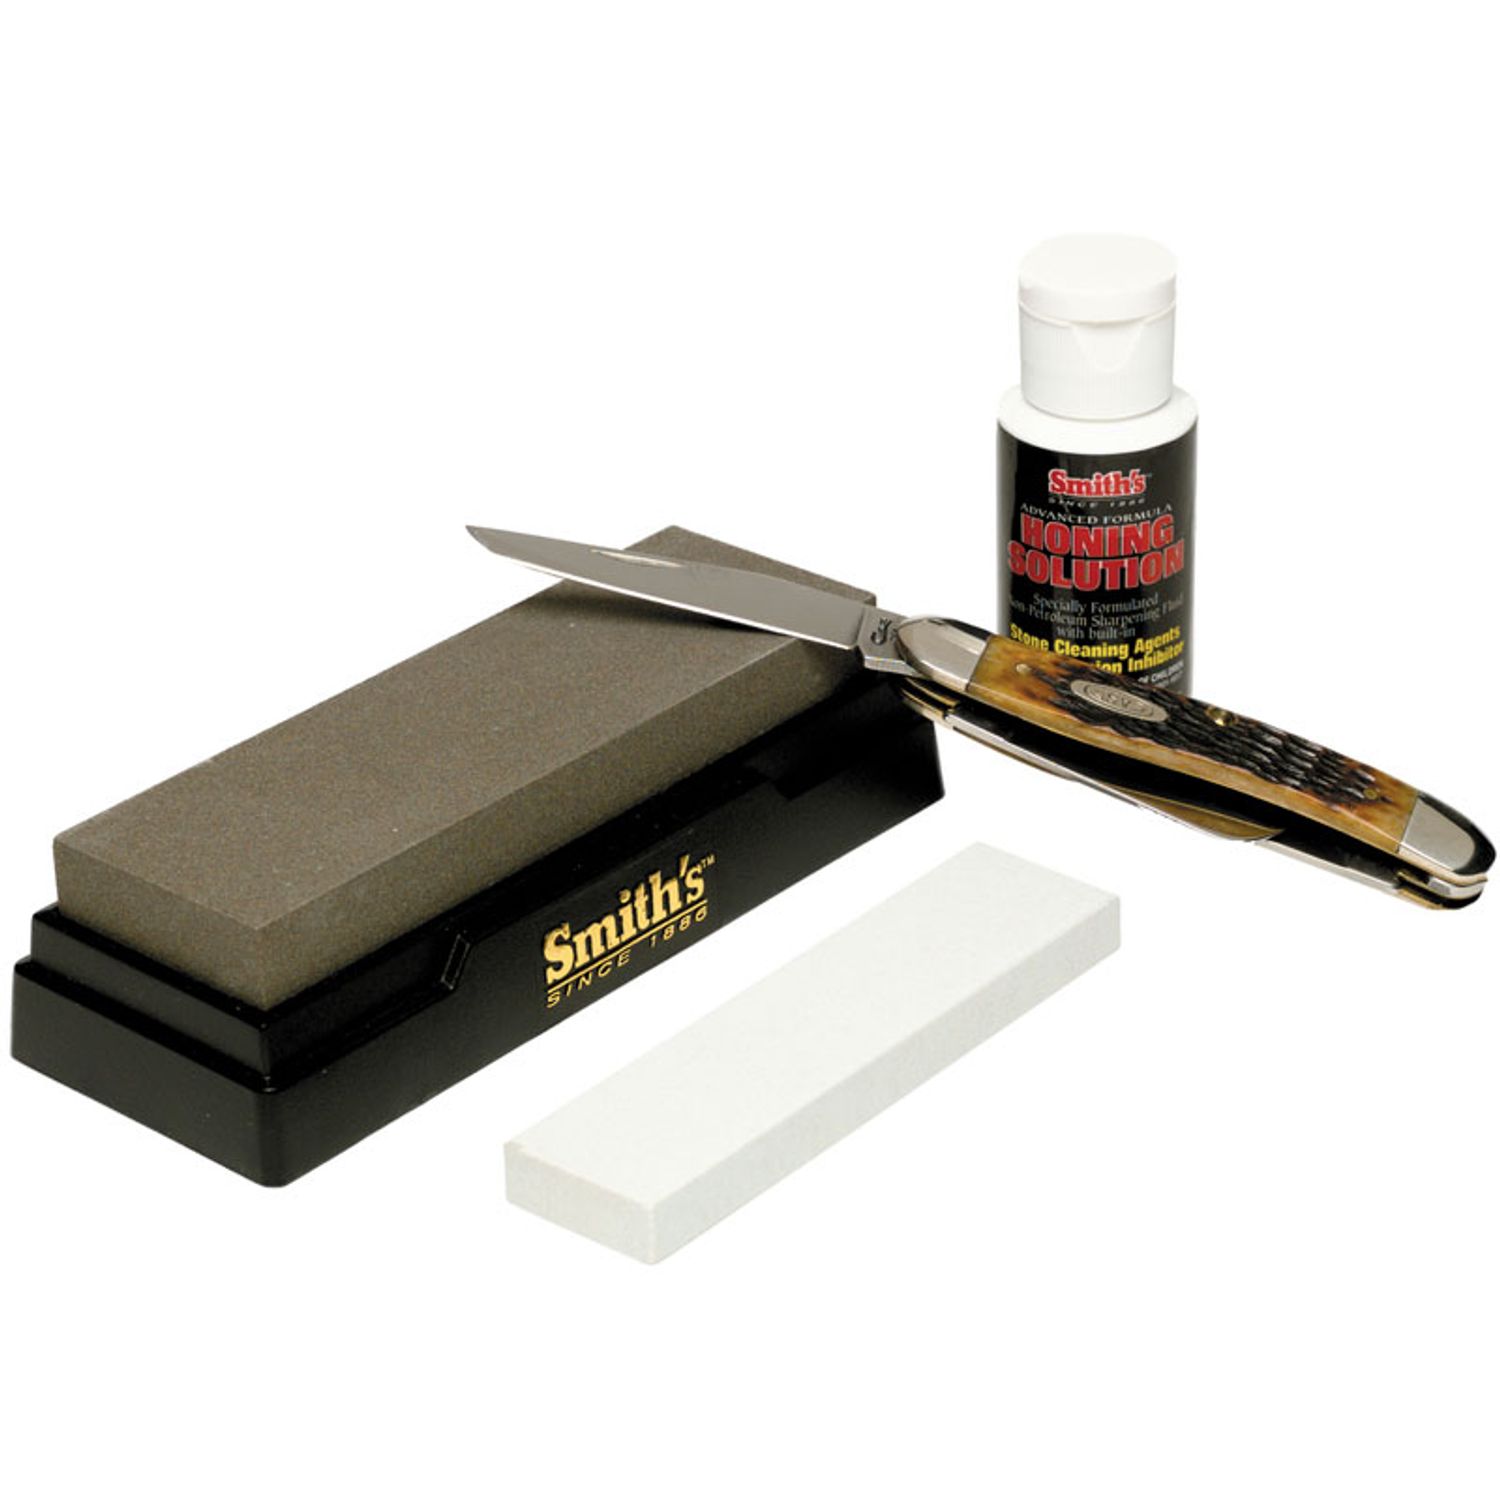 Reviews for Smith's Diamond Combination Sharpener